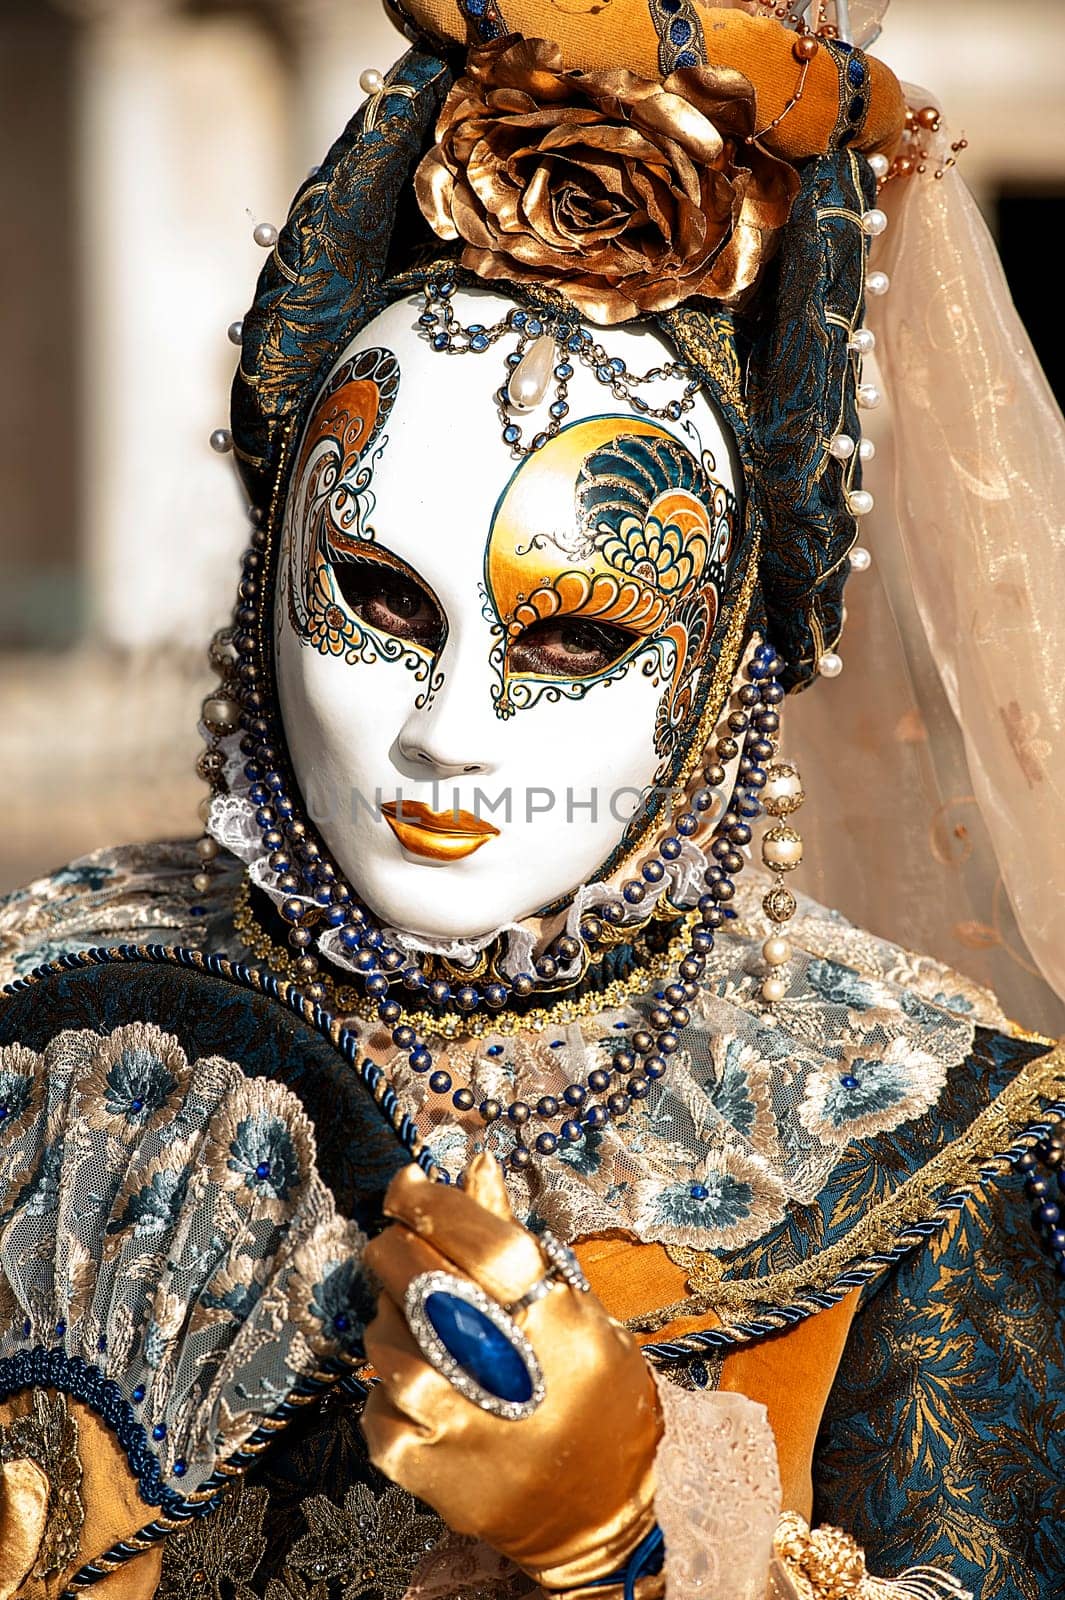 Venice carnival 2018 by Giamplume